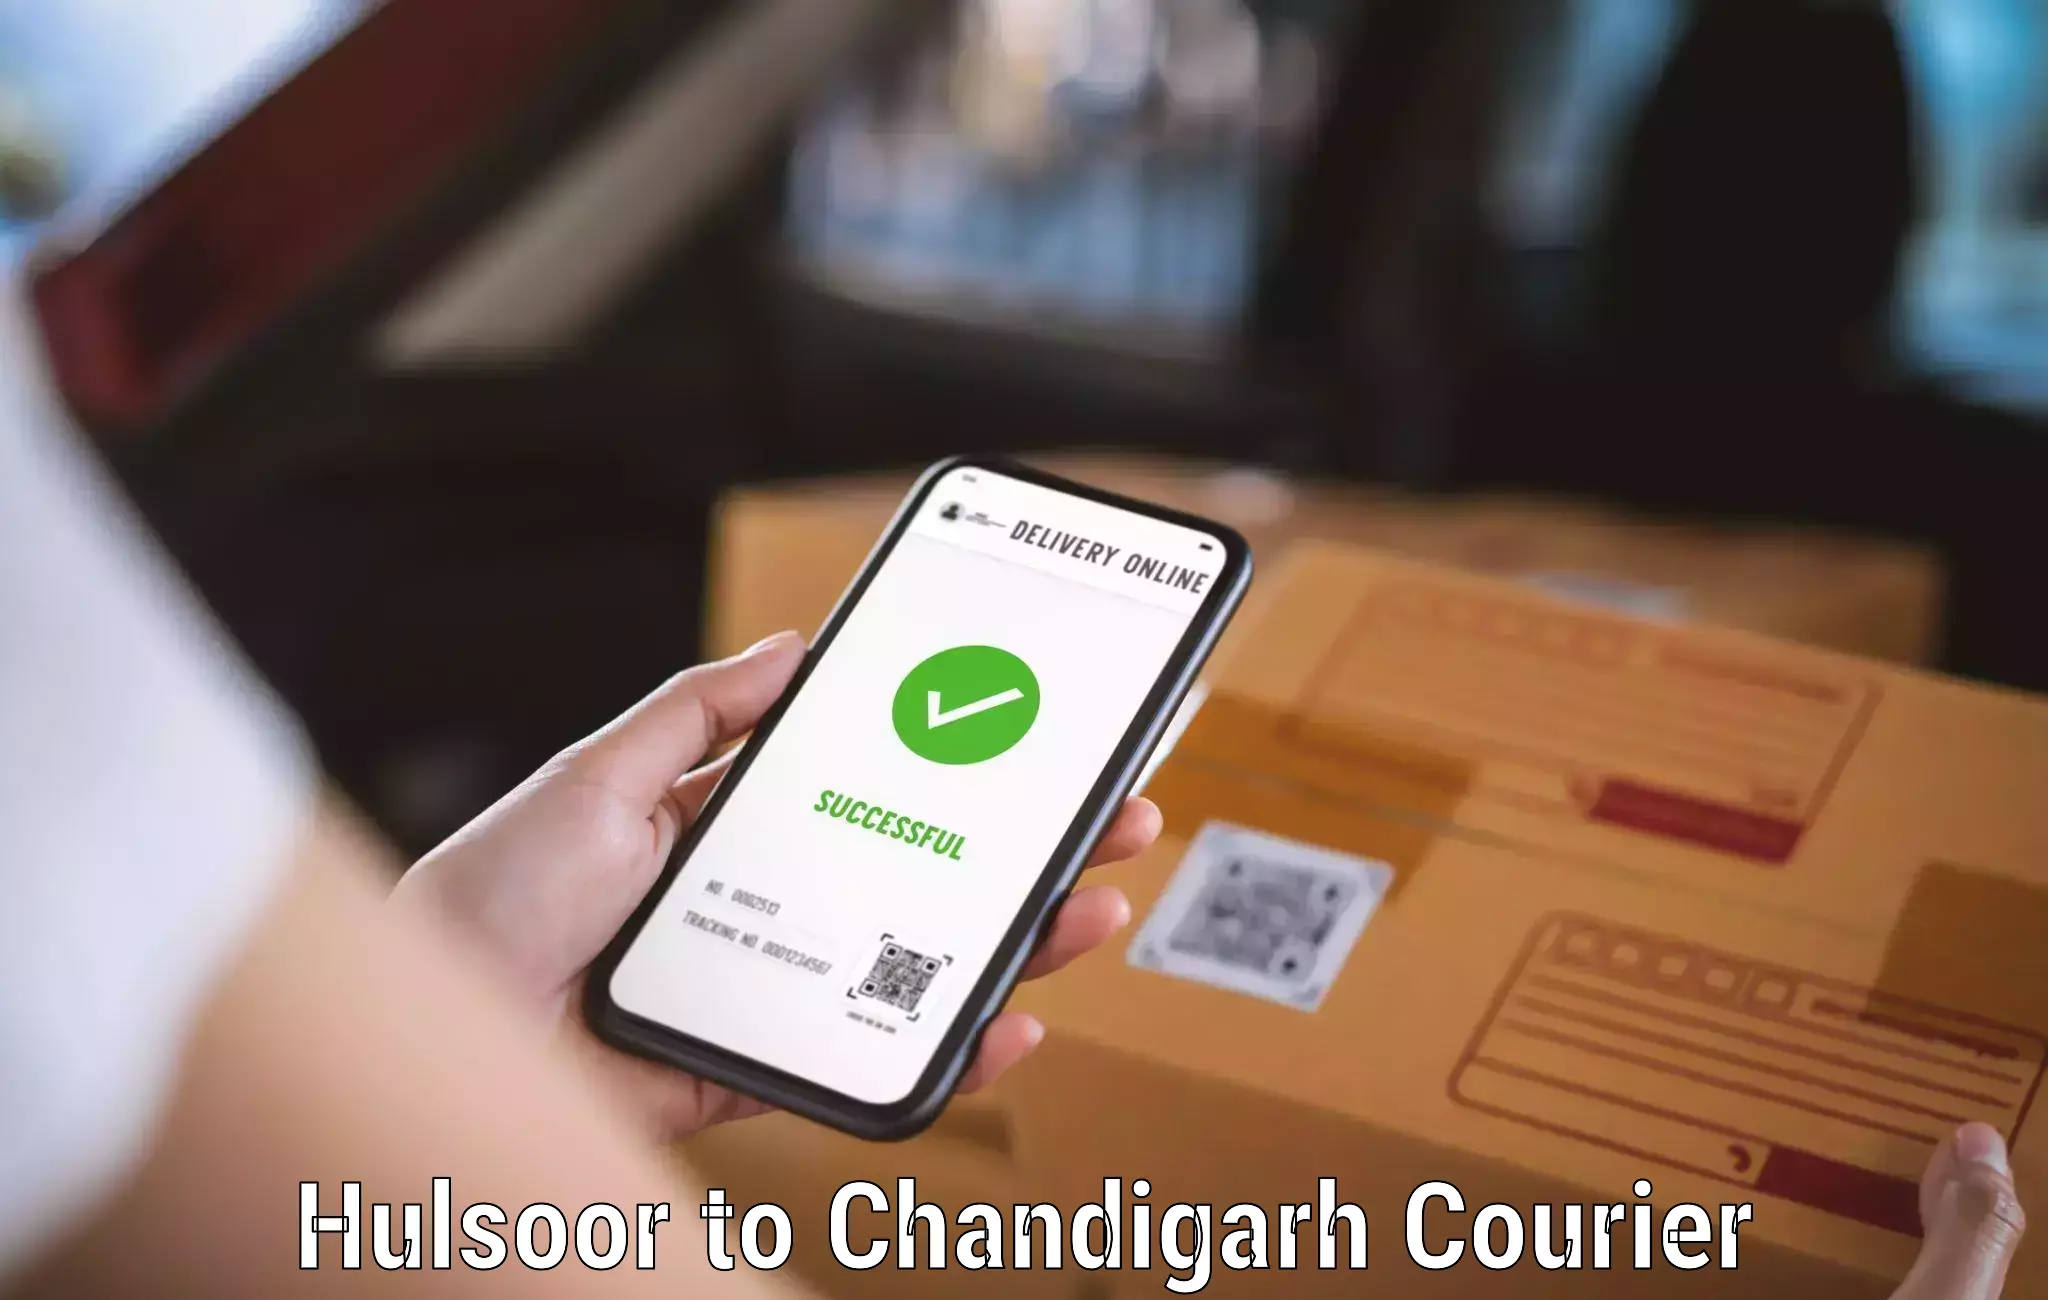 Courier service partnerships Hulsoor to Chandigarh